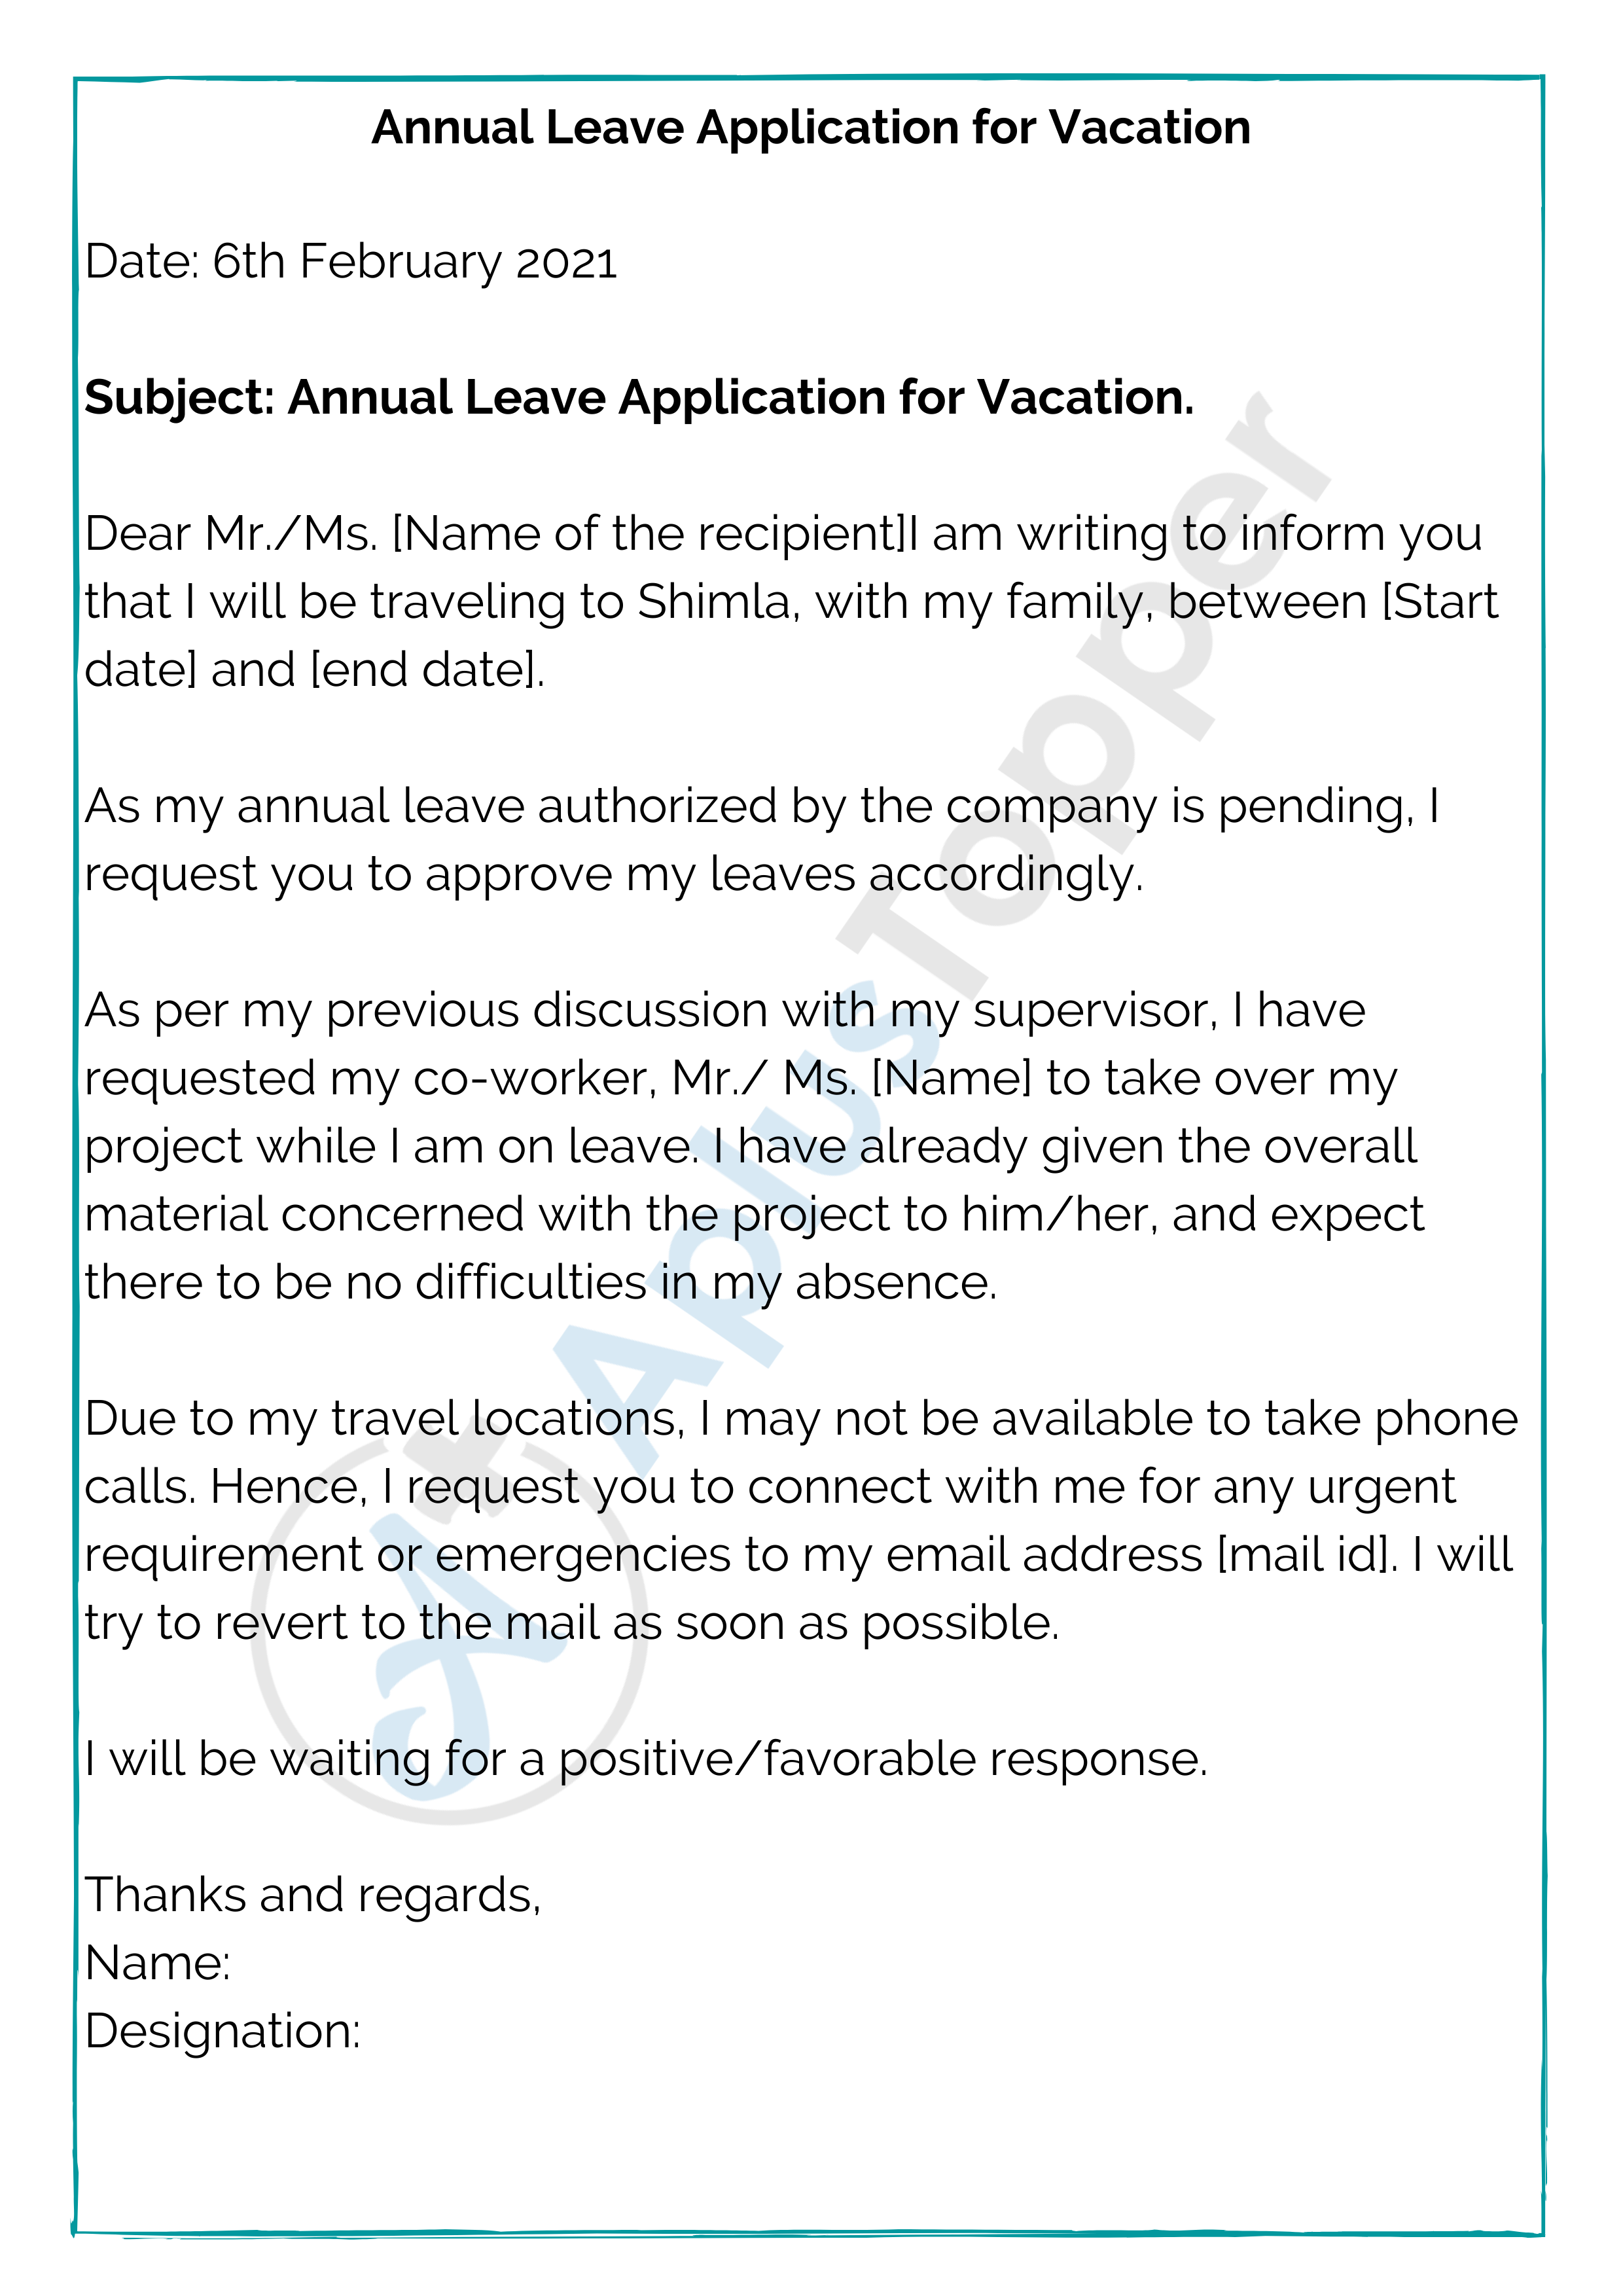 cover letter for annual leave